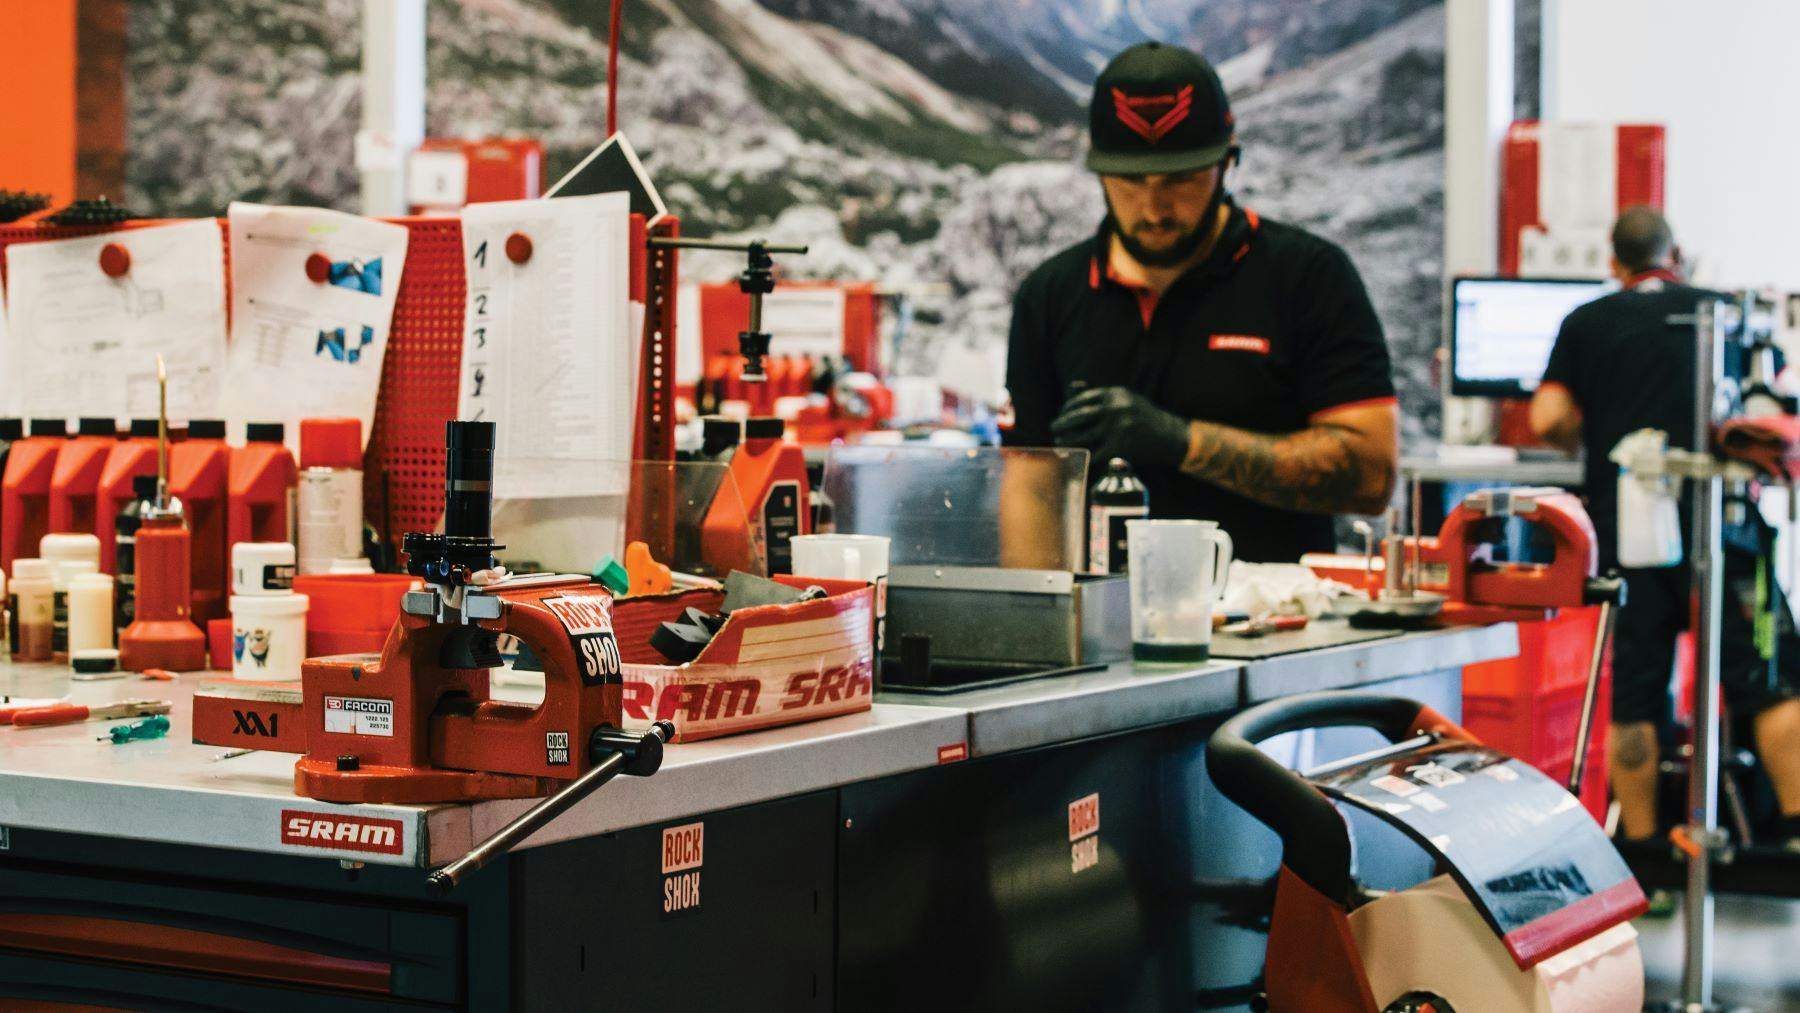 The new SRAM service centre in Italy will become the company’s seventh service location in Europe. – Photo SRAM